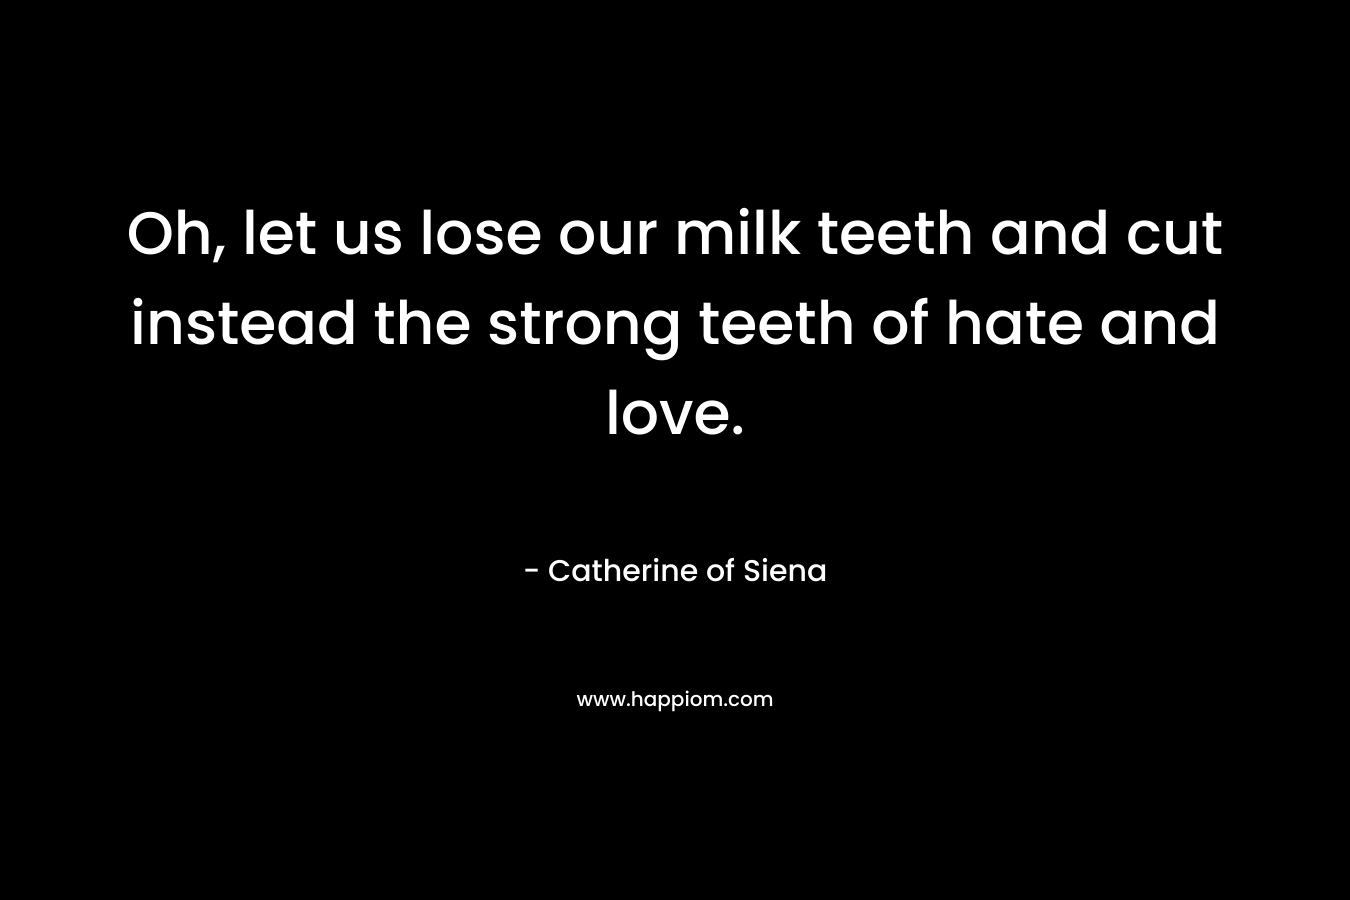 Oh, let us lose our milk teeth and cut instead the strong teeth of hate and love. – Catherine of Siena